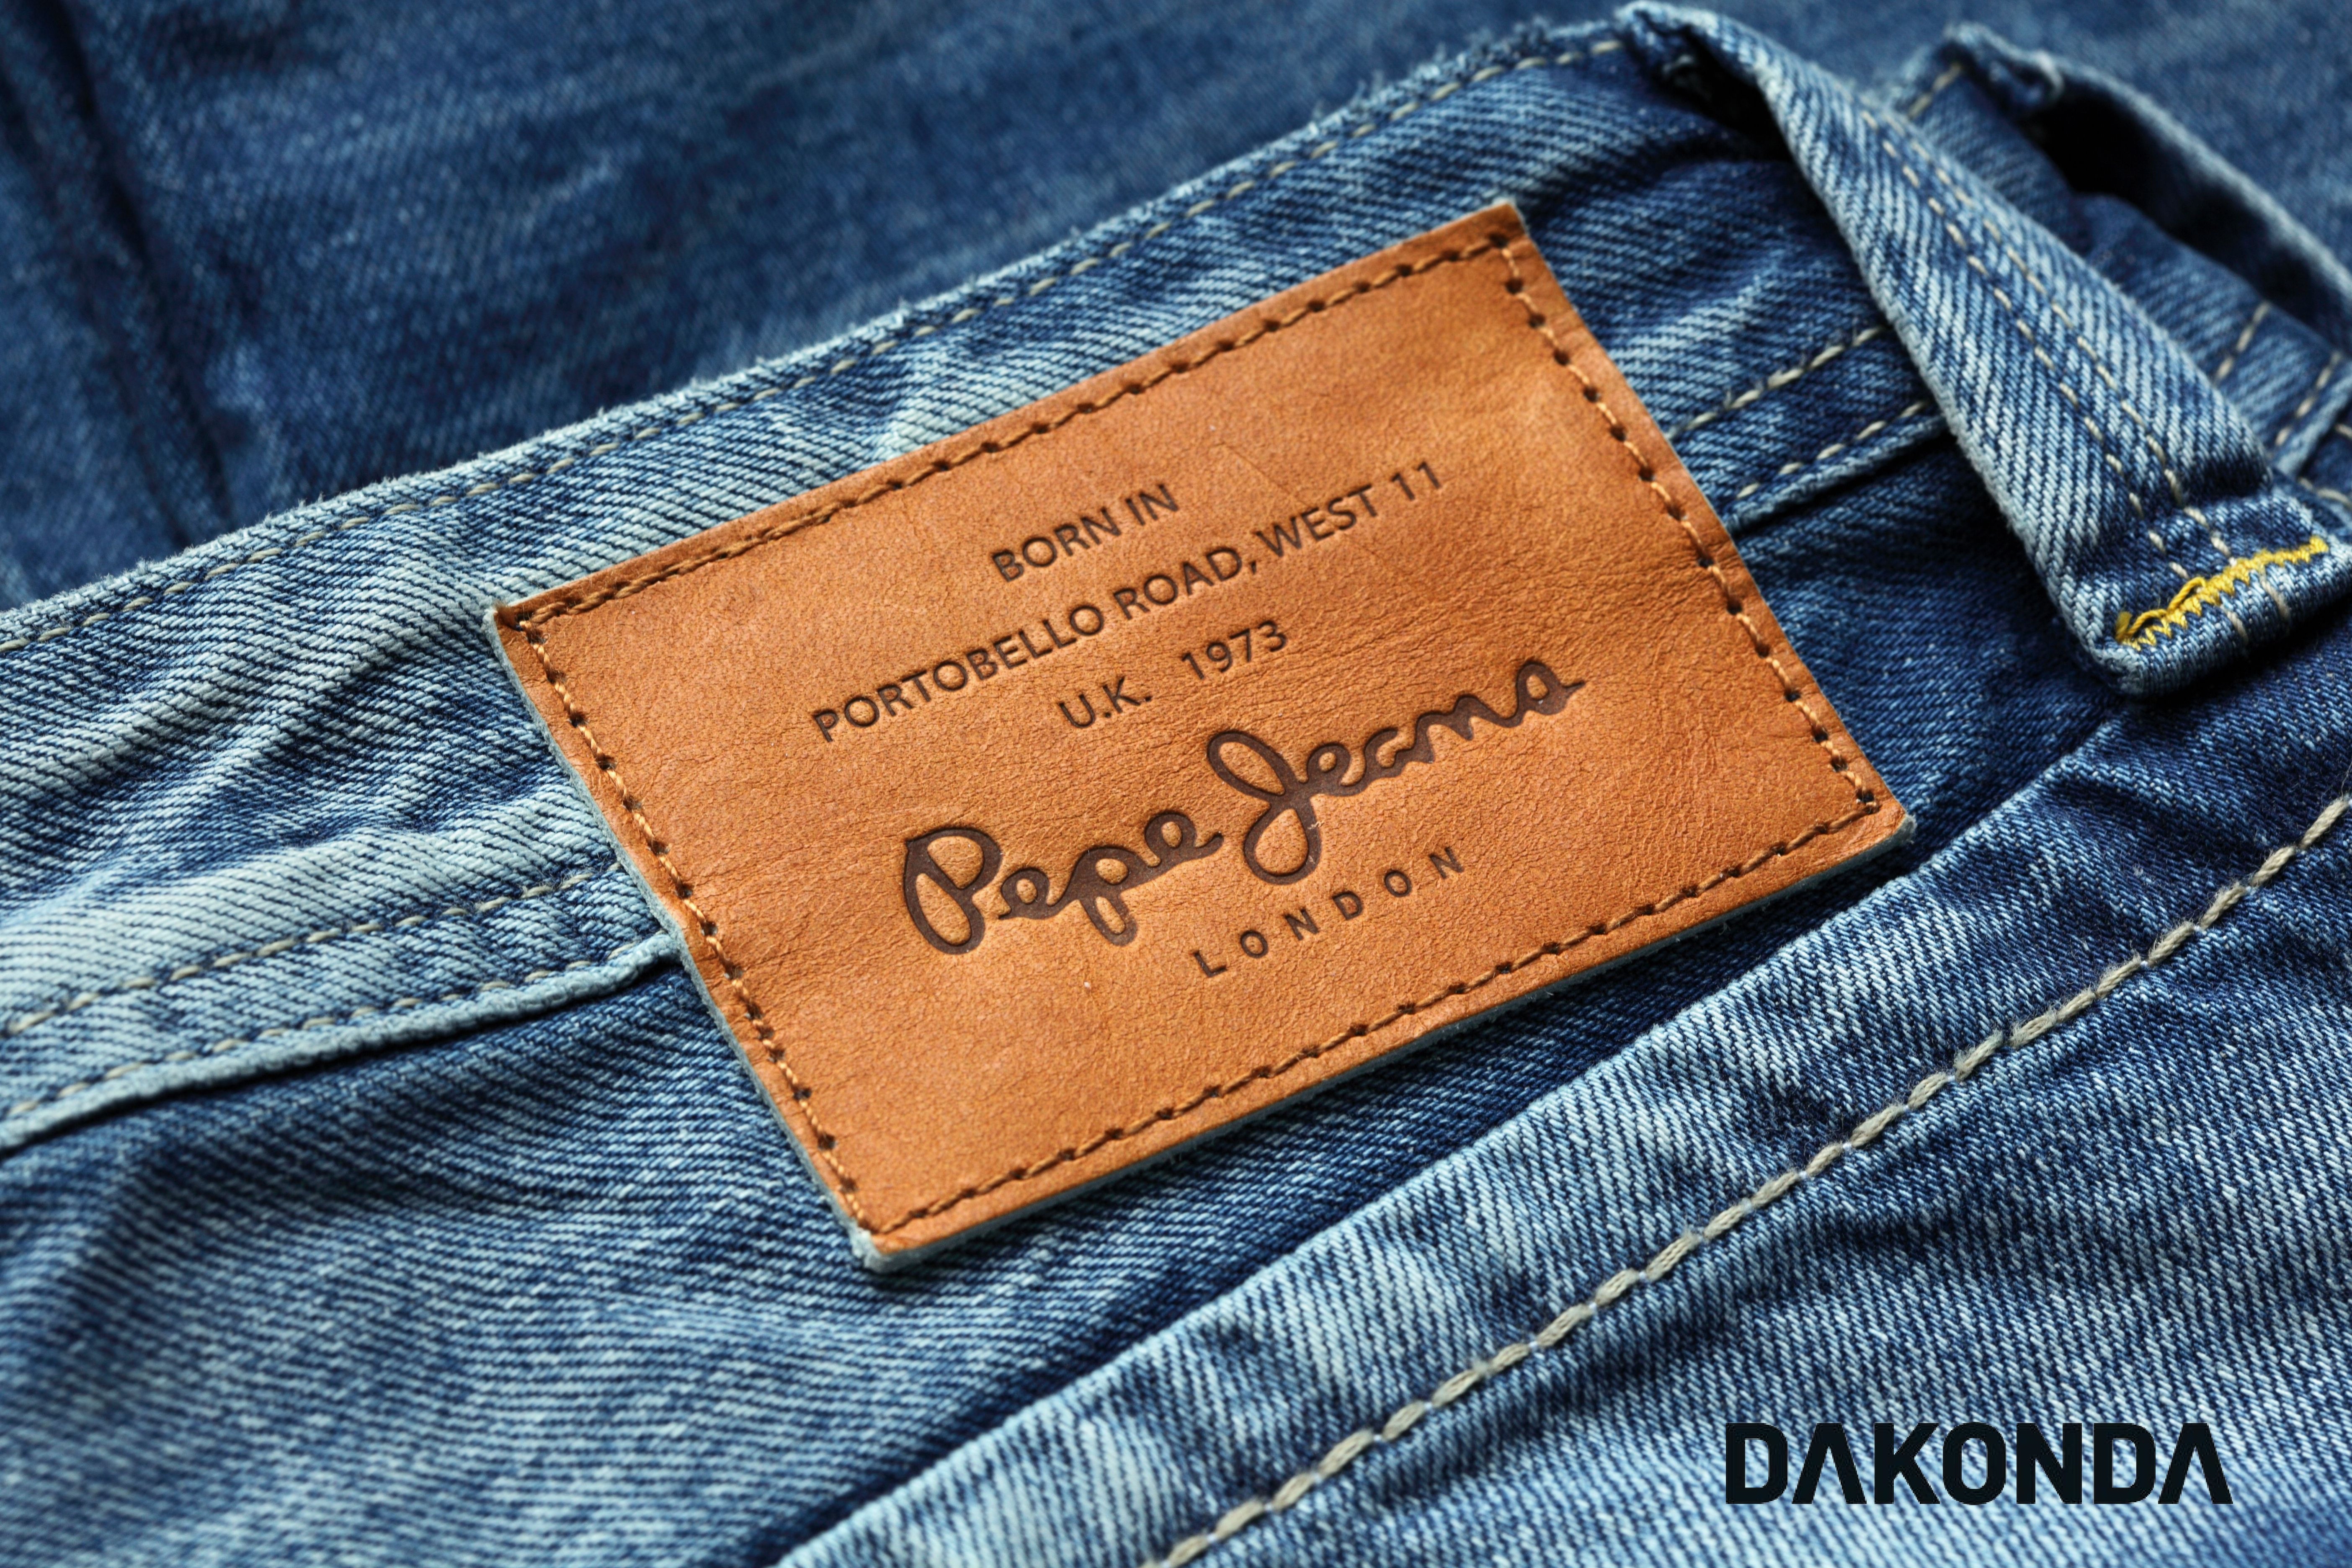 What is the story of Pepe Jeans - Dakonda